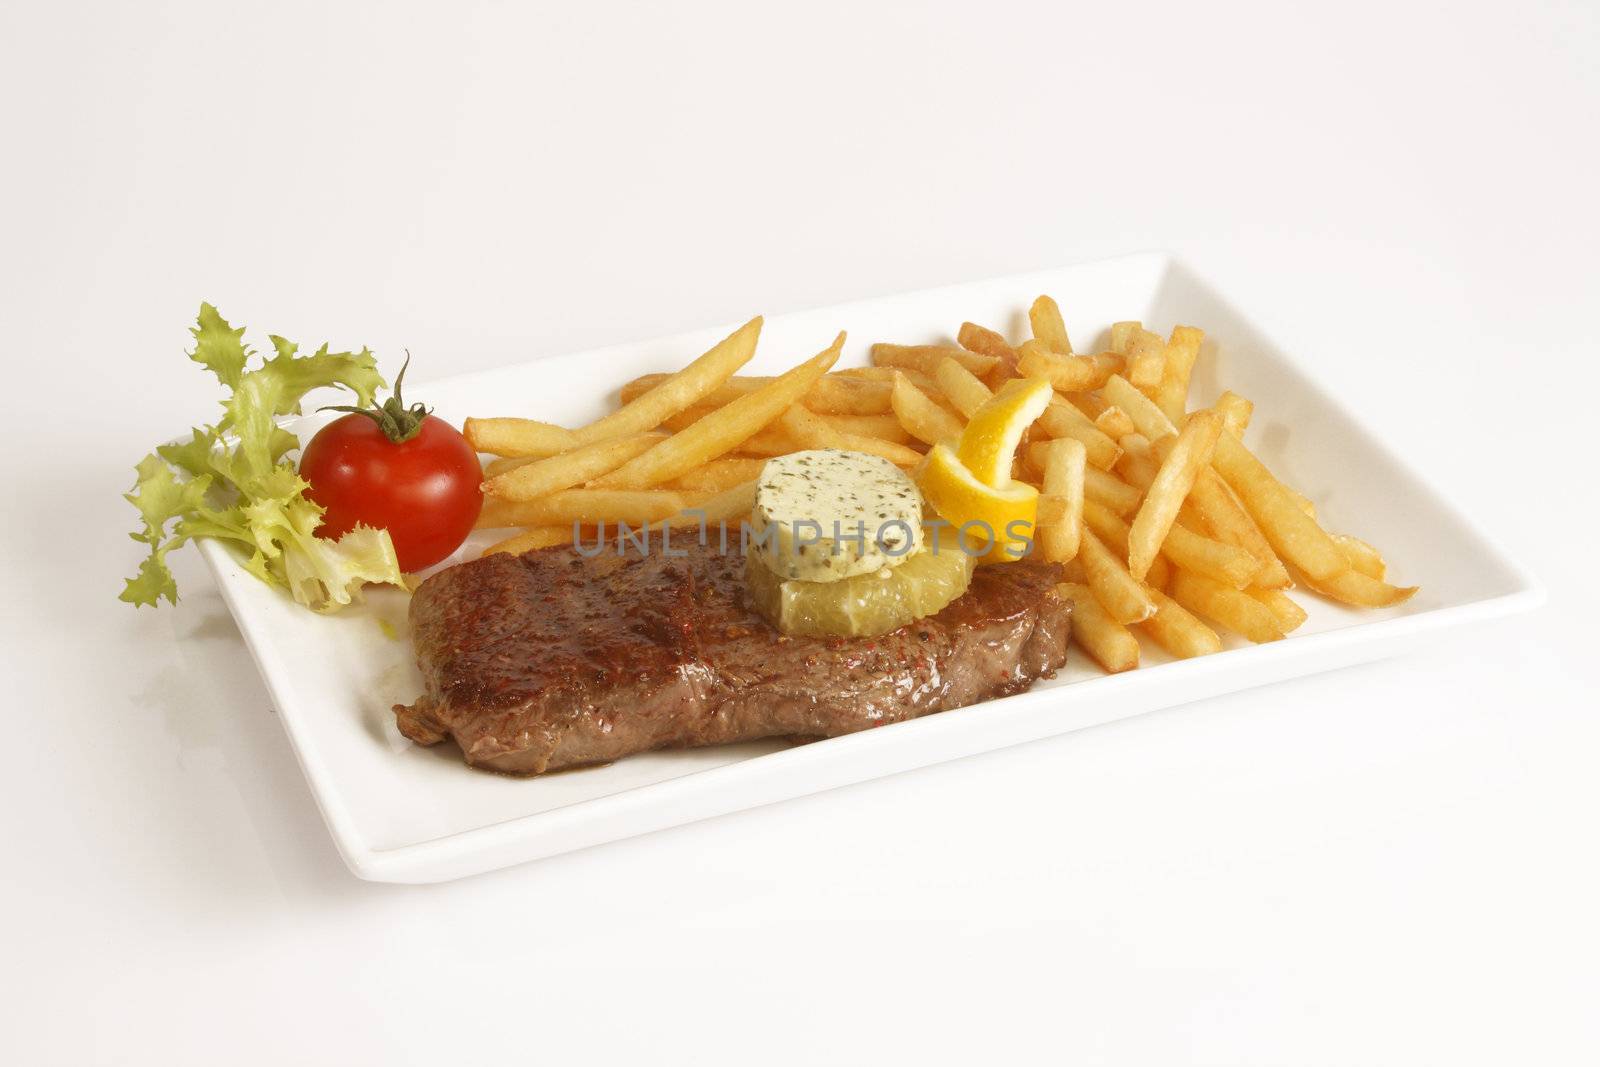 Grilled beef steak with french fries and sauce served in plate.